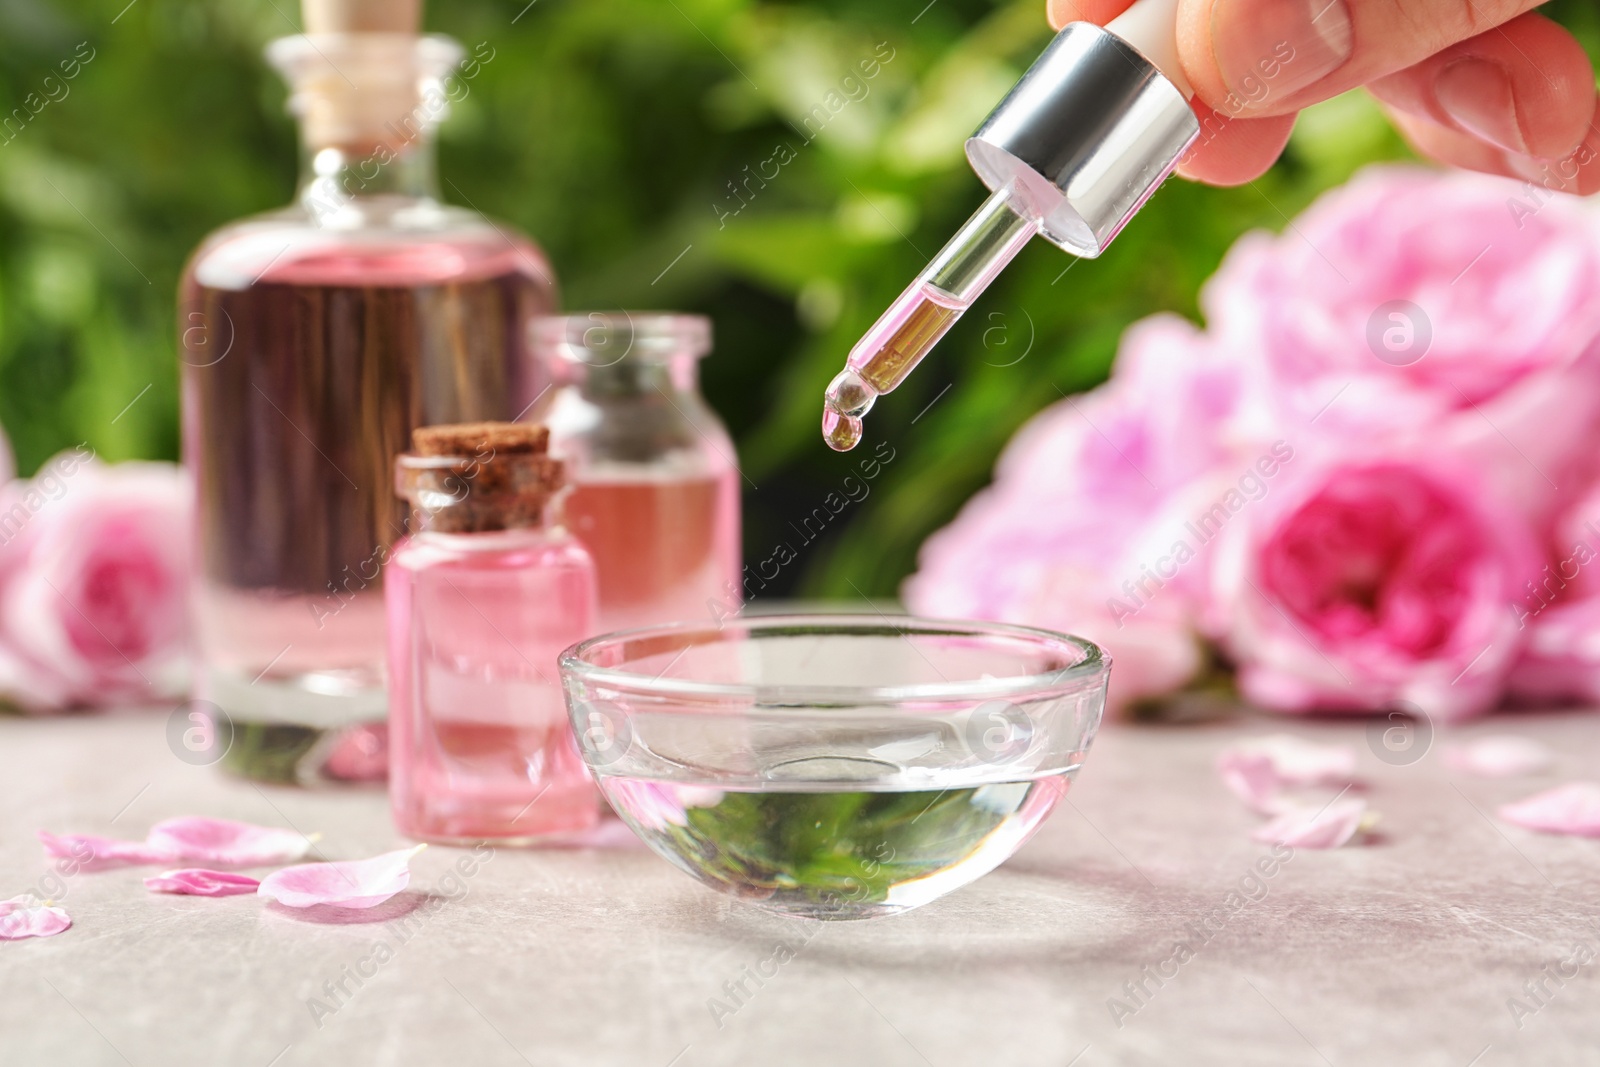 Photo of Woman dripping rose essential oil into bowl on table, closeup